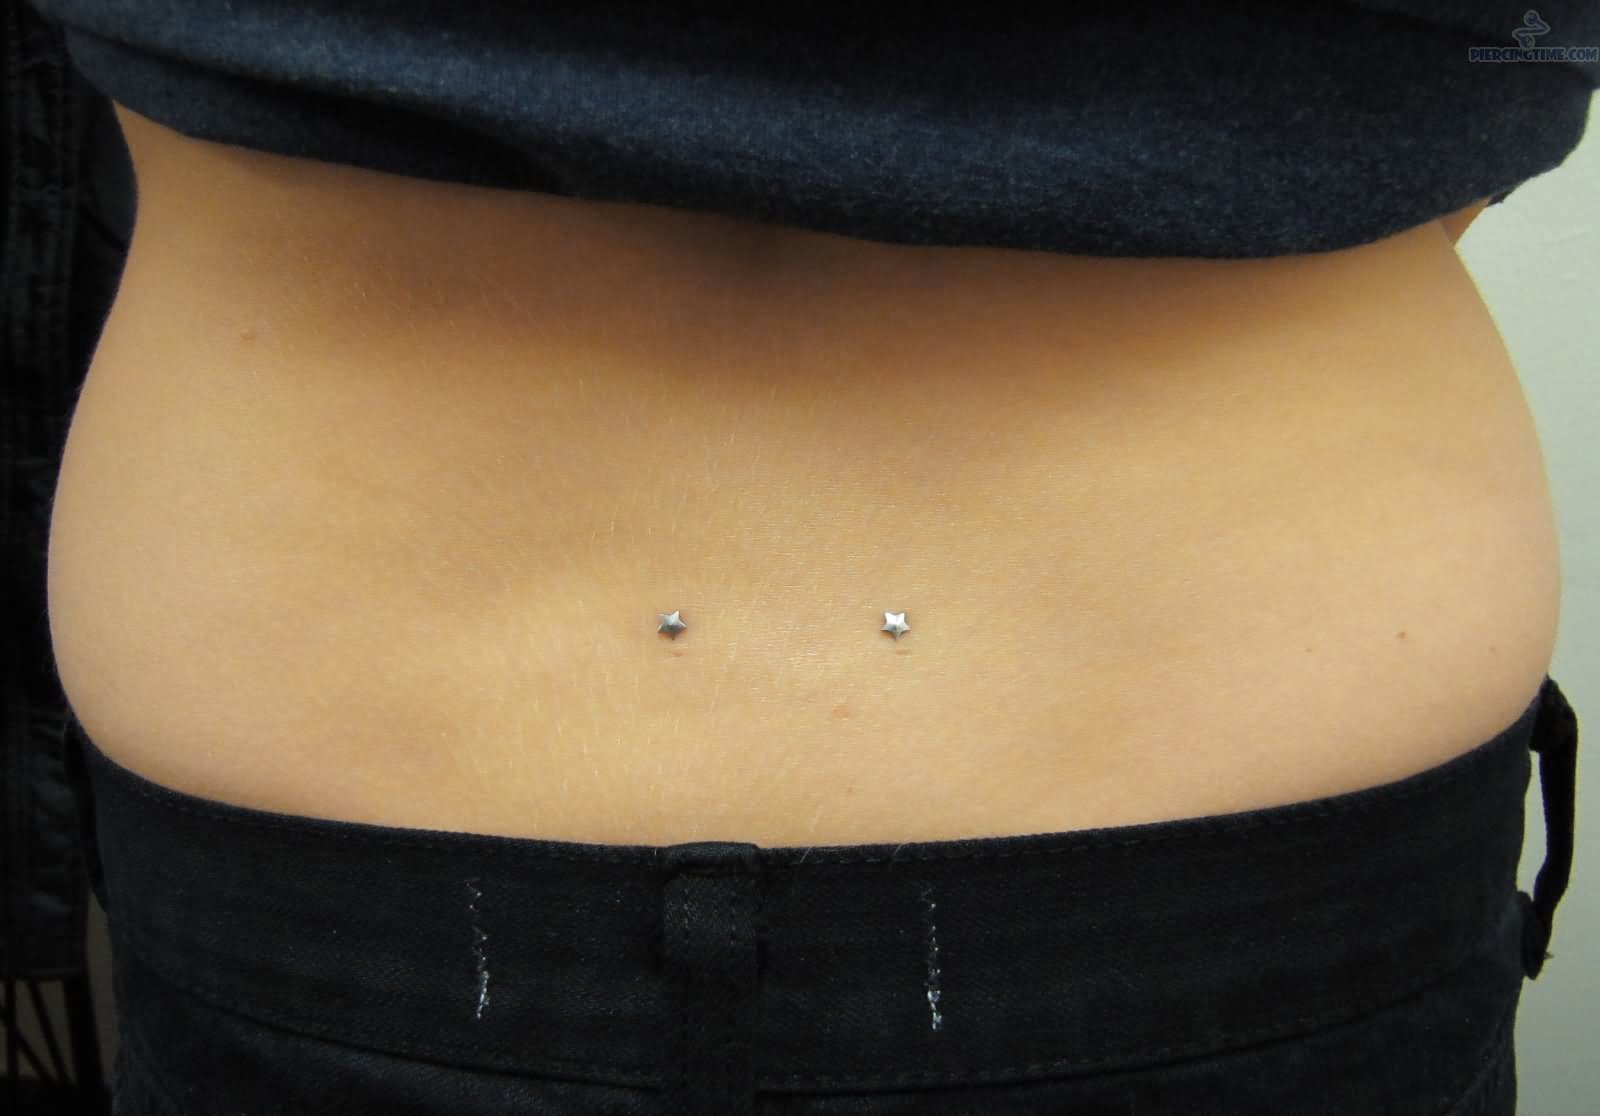 Dimple Lower Back Piercing With Star Dermals